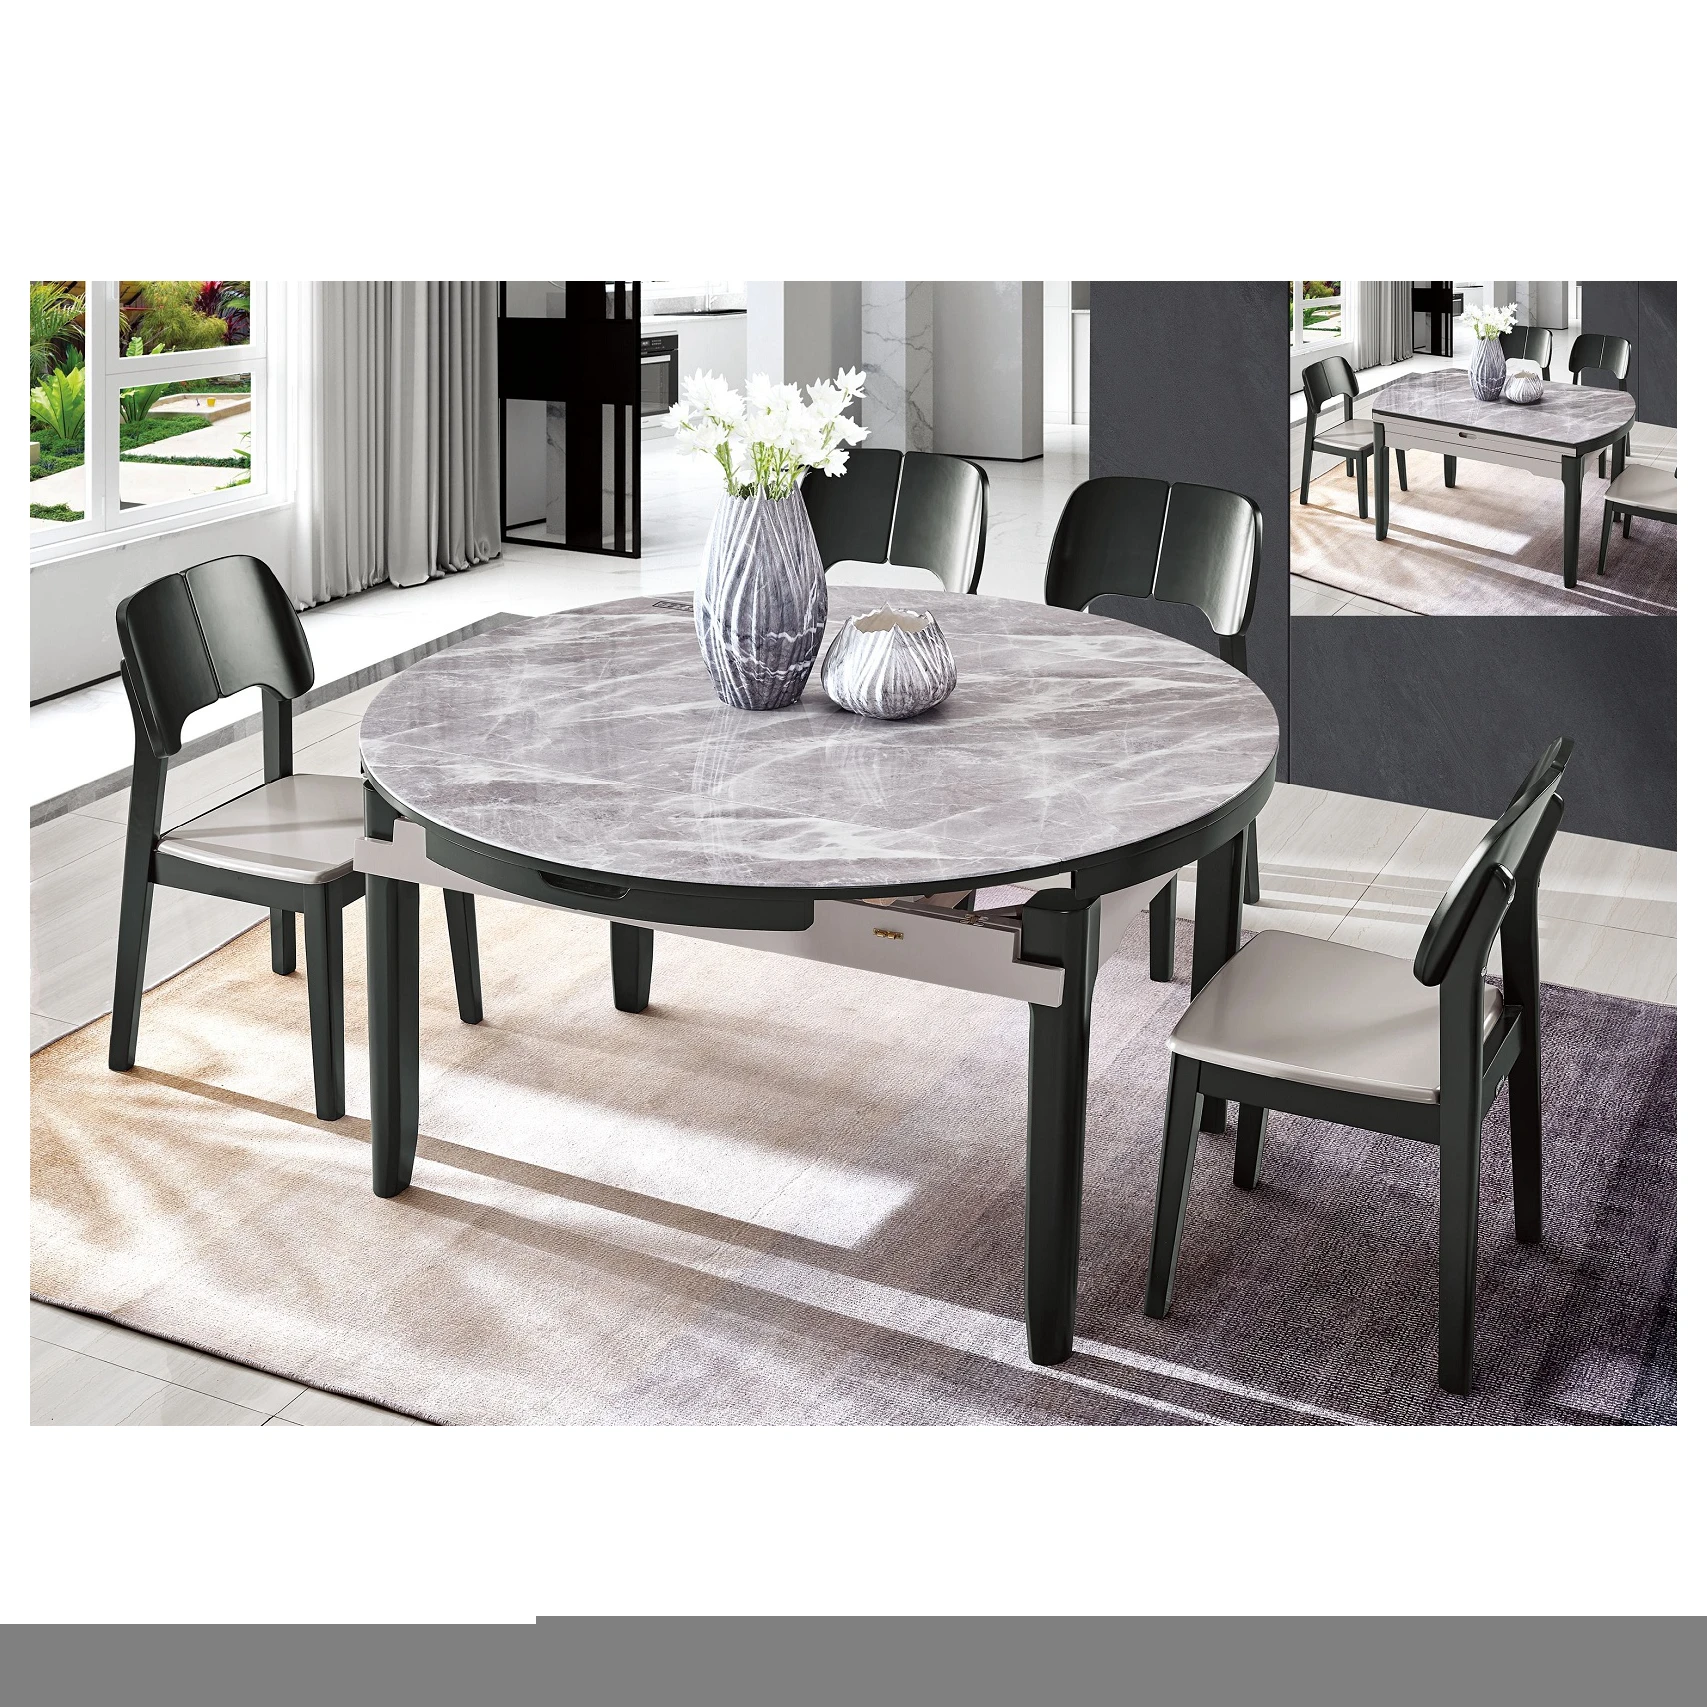 Customizable dining tables and chairs High quality wood furniture